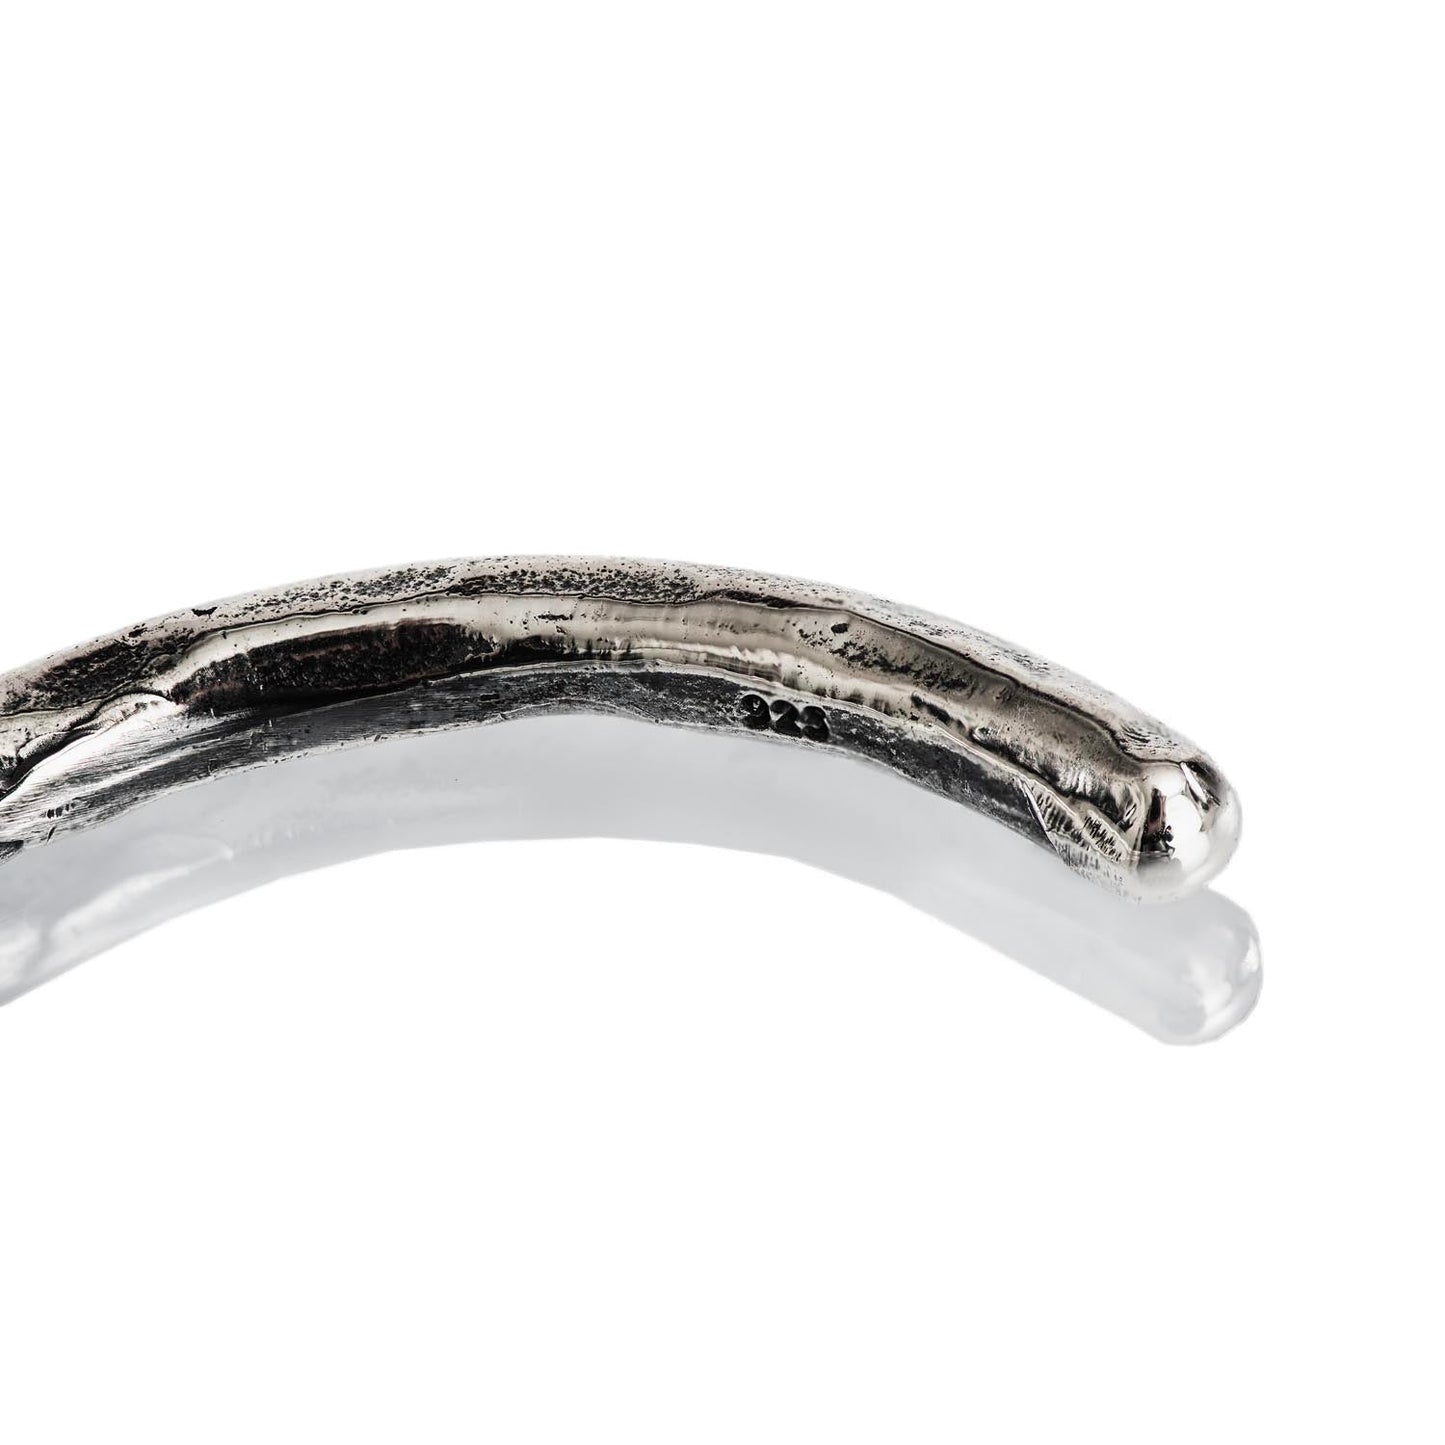 VOLCANO CUFF. - 925 Silver Bangle Bracelet 4mm - PALM. | Handcrafted Jewelry-